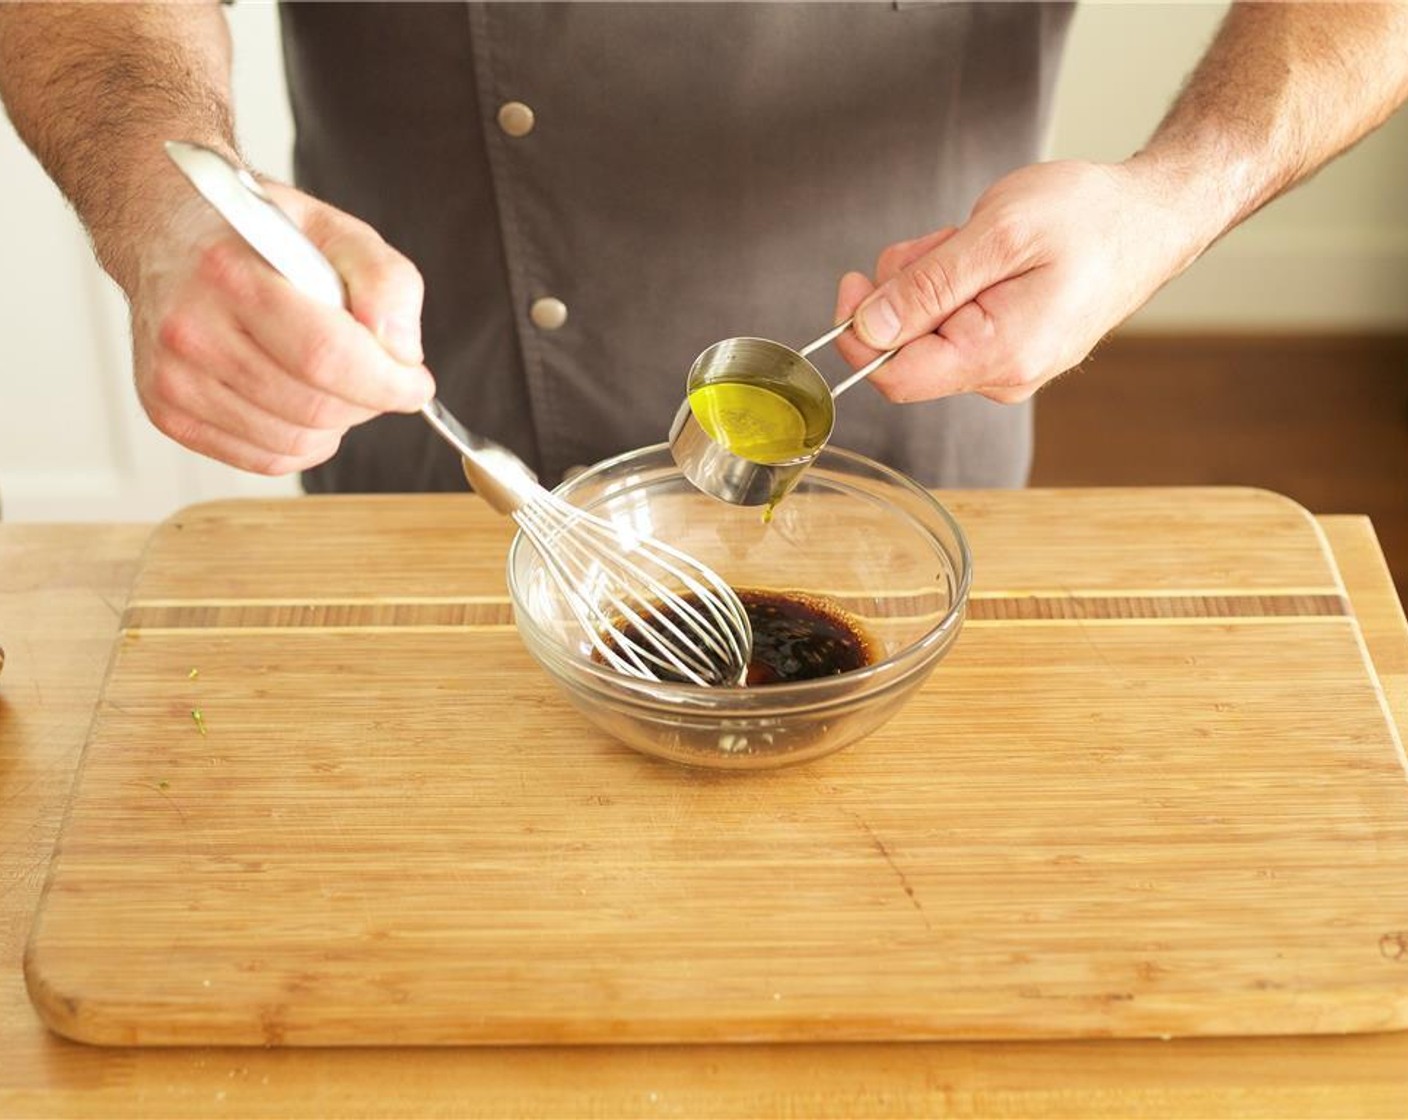 step 6 Combine the Maple Syrup (1 tsp) and Balsamic Vinegar (2 Tbsp) in a small bowl and stir. Slowly whisk in remaining olive oil and set aside.